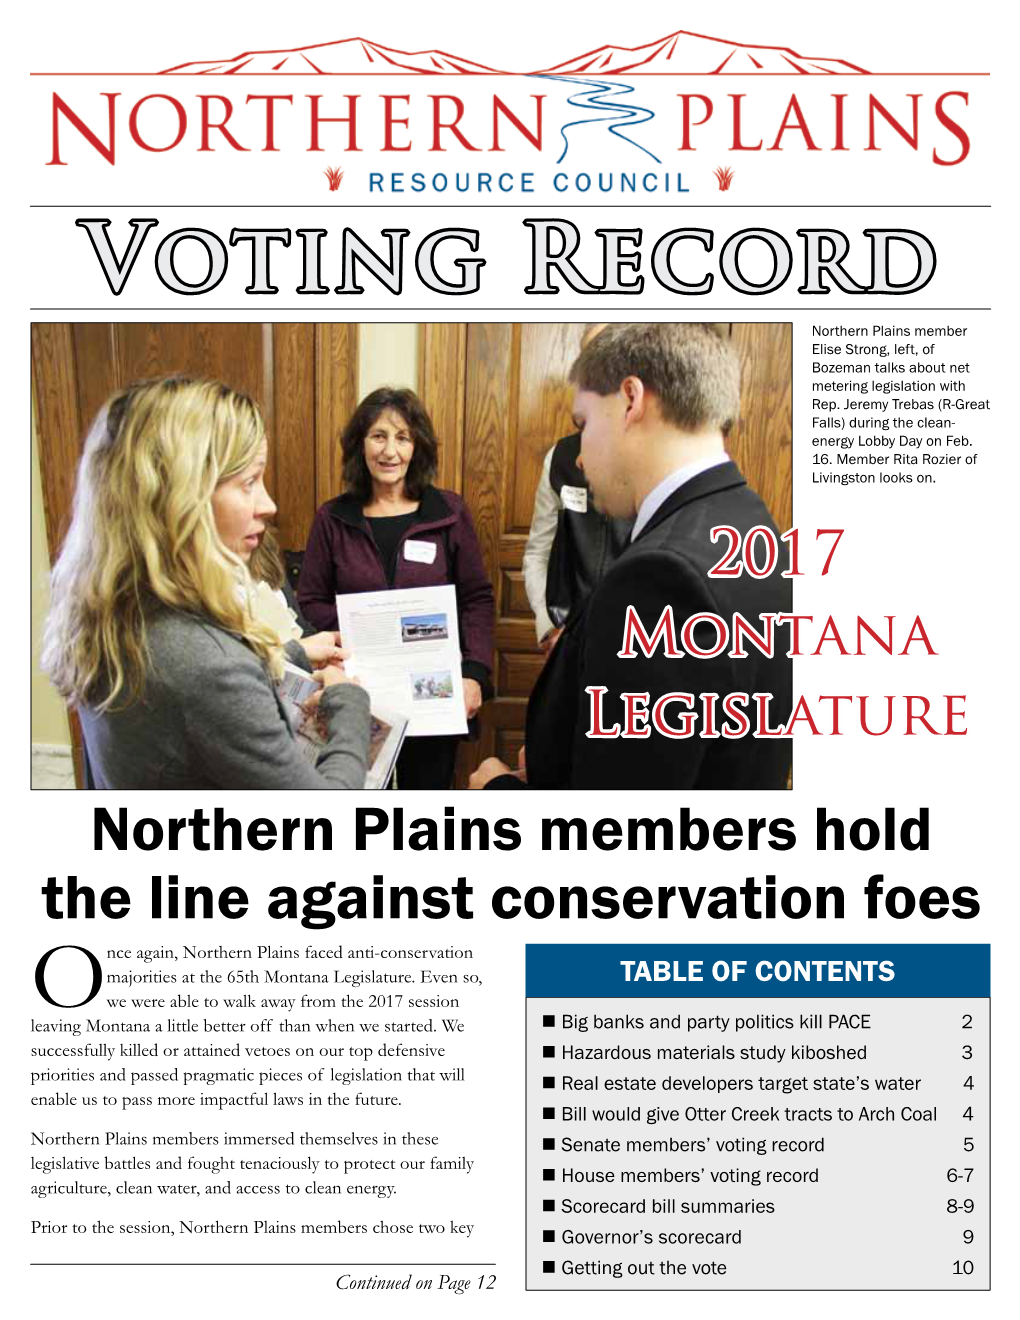 Voting Record Northern Plains Member Elise Strong, Left, of Bozeman Talks About Net Metering Legislation with Rep